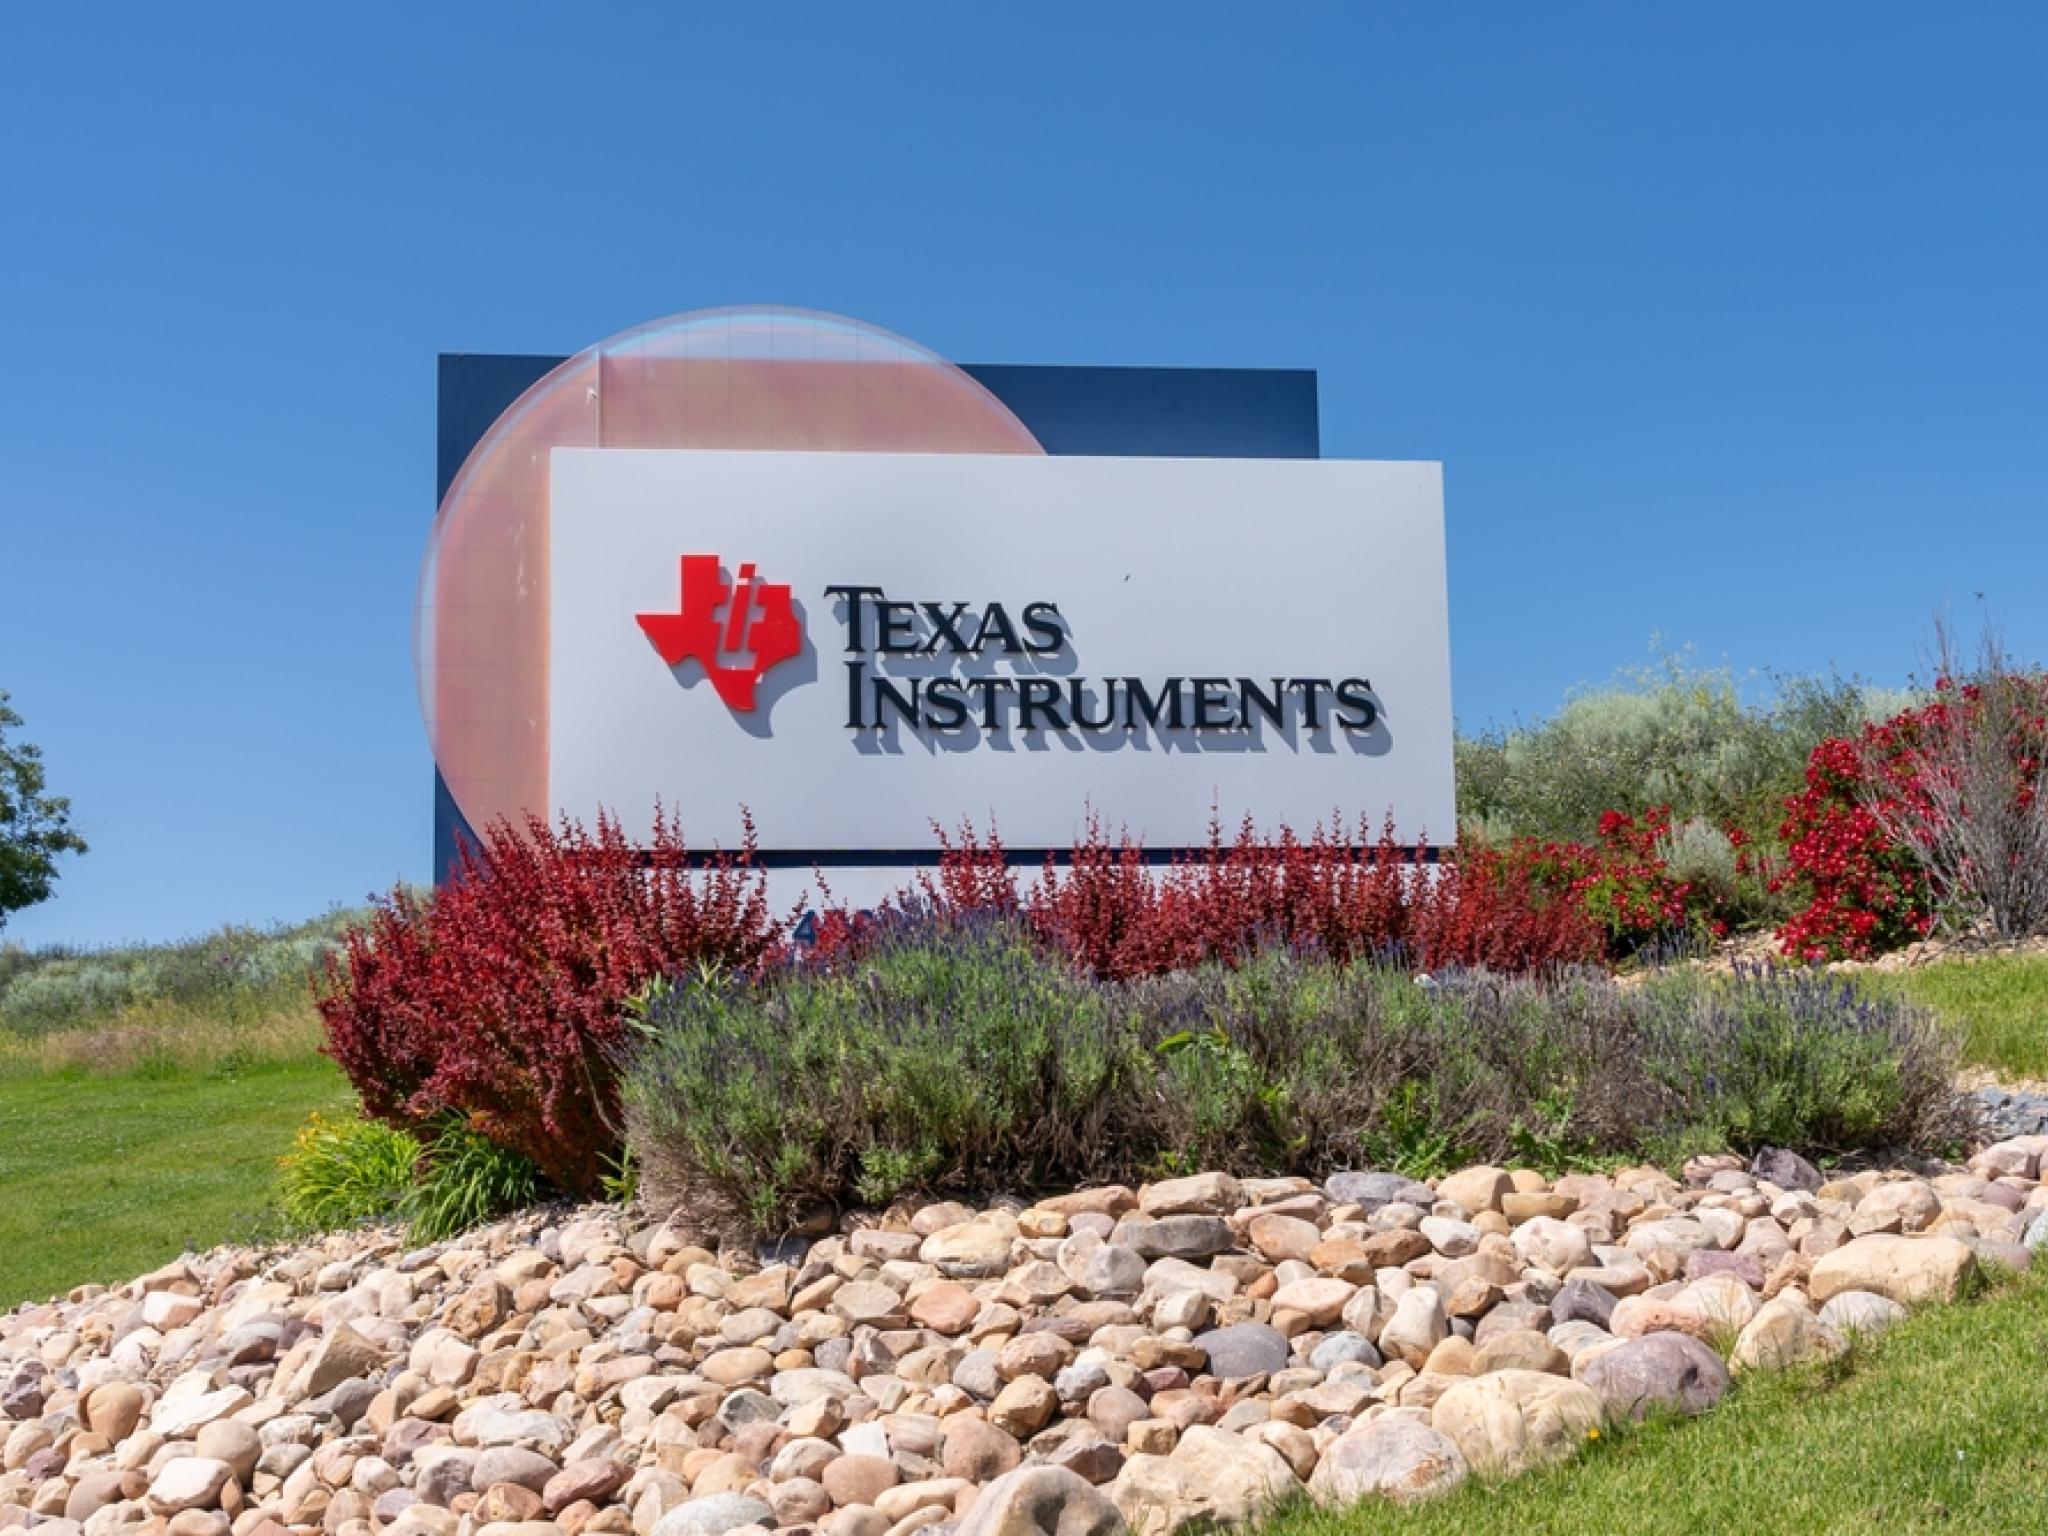  whats-going-on-with-texas-instruments-stock-after-activist-elliott-bags-25b-stake 